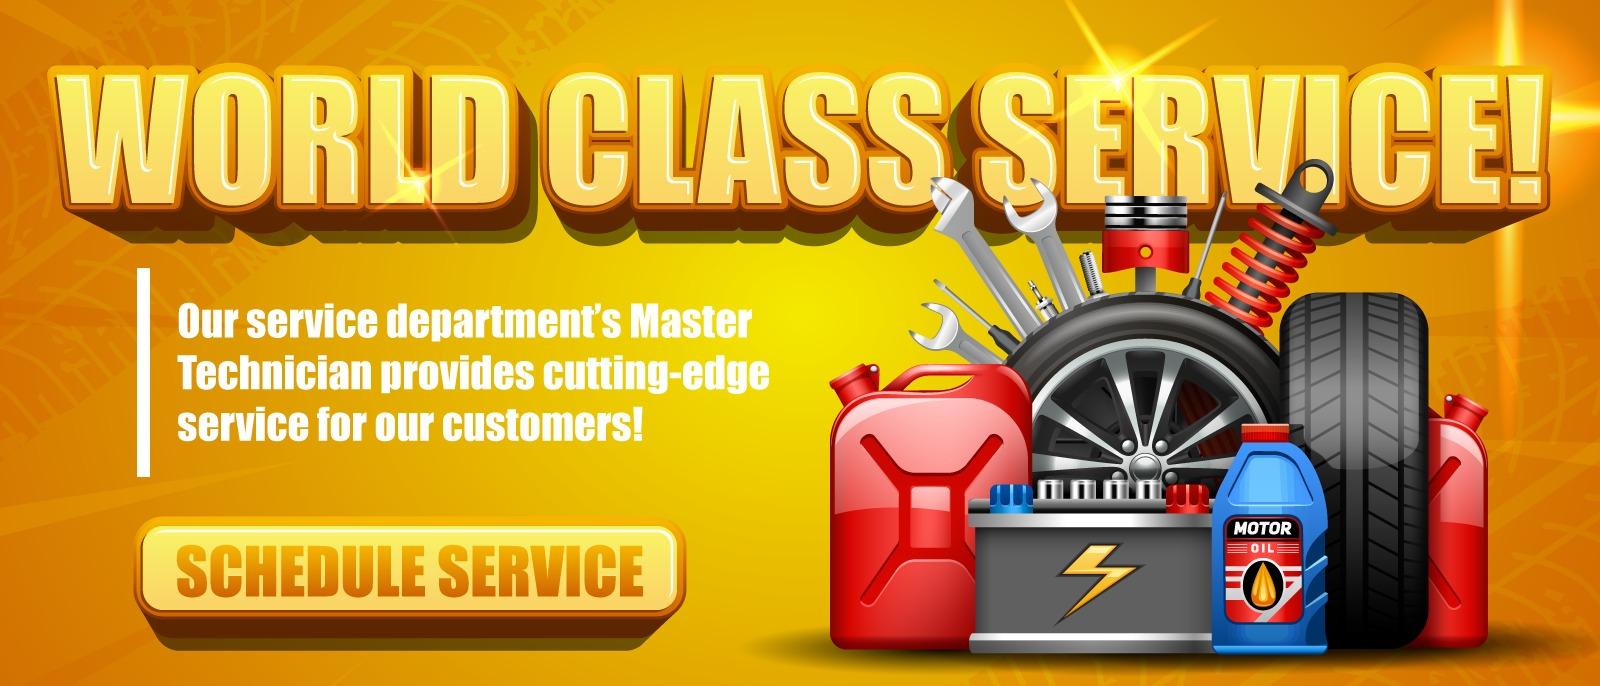 World Class Service 
Our service department's Master provides cutting-edge Technician service for our customers!